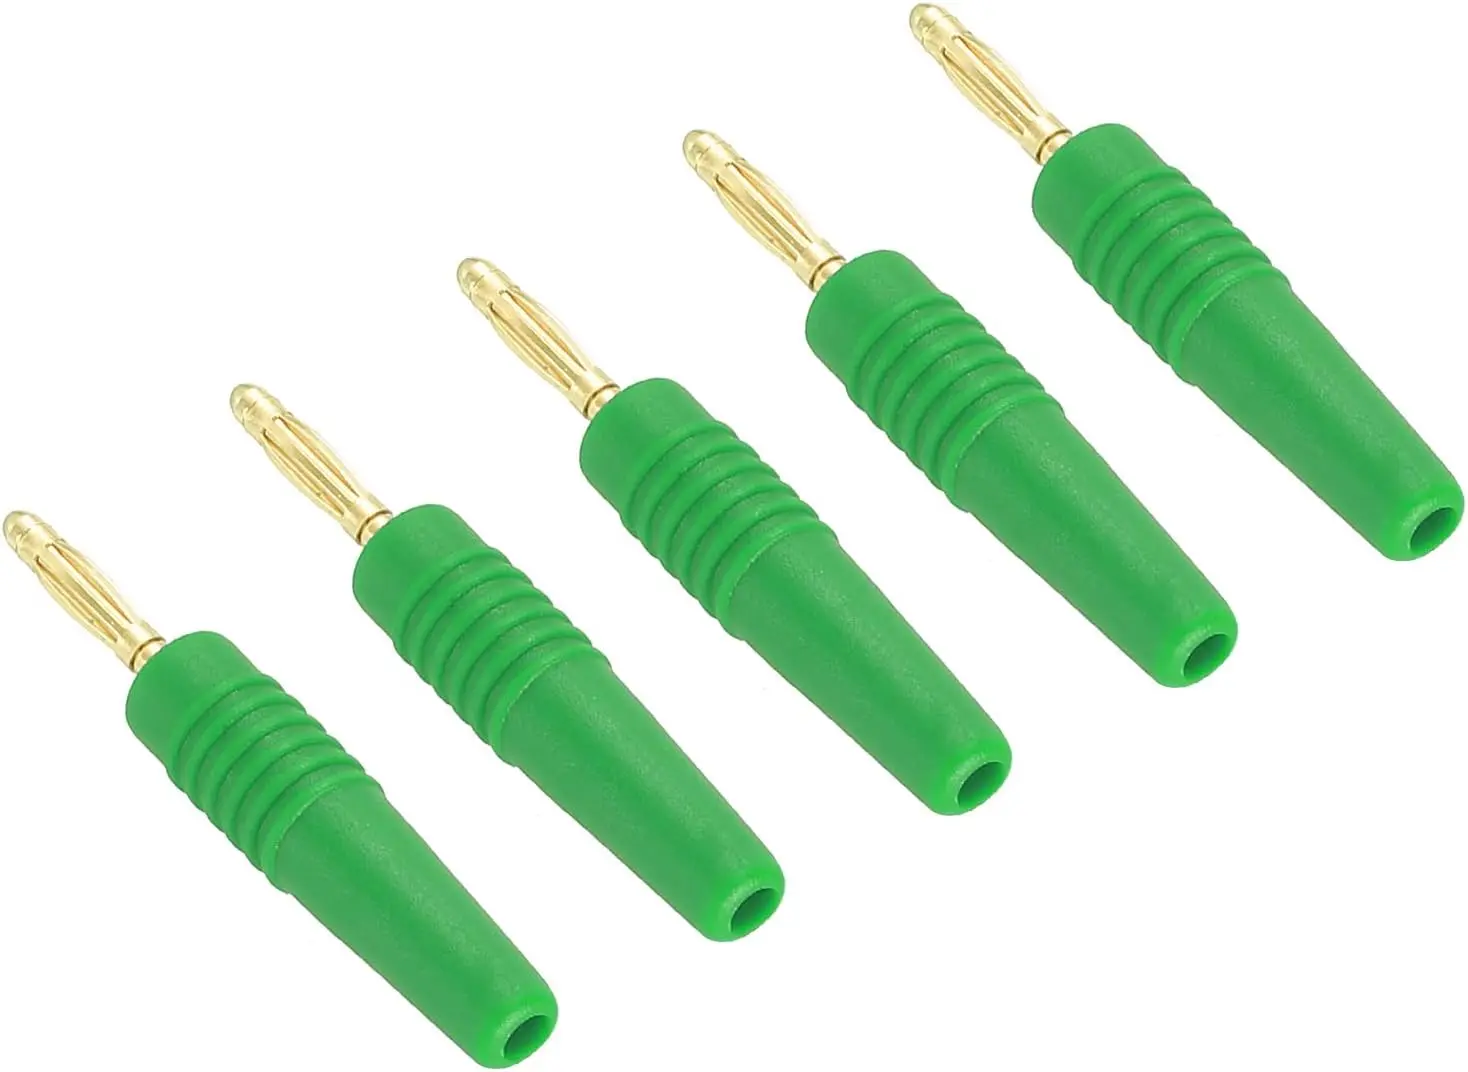 

5 Pack Banana Plugs Connector Solder Type Speaker Banana Plugs 2mm Gold-Plated Copper Green for Speaker Wires